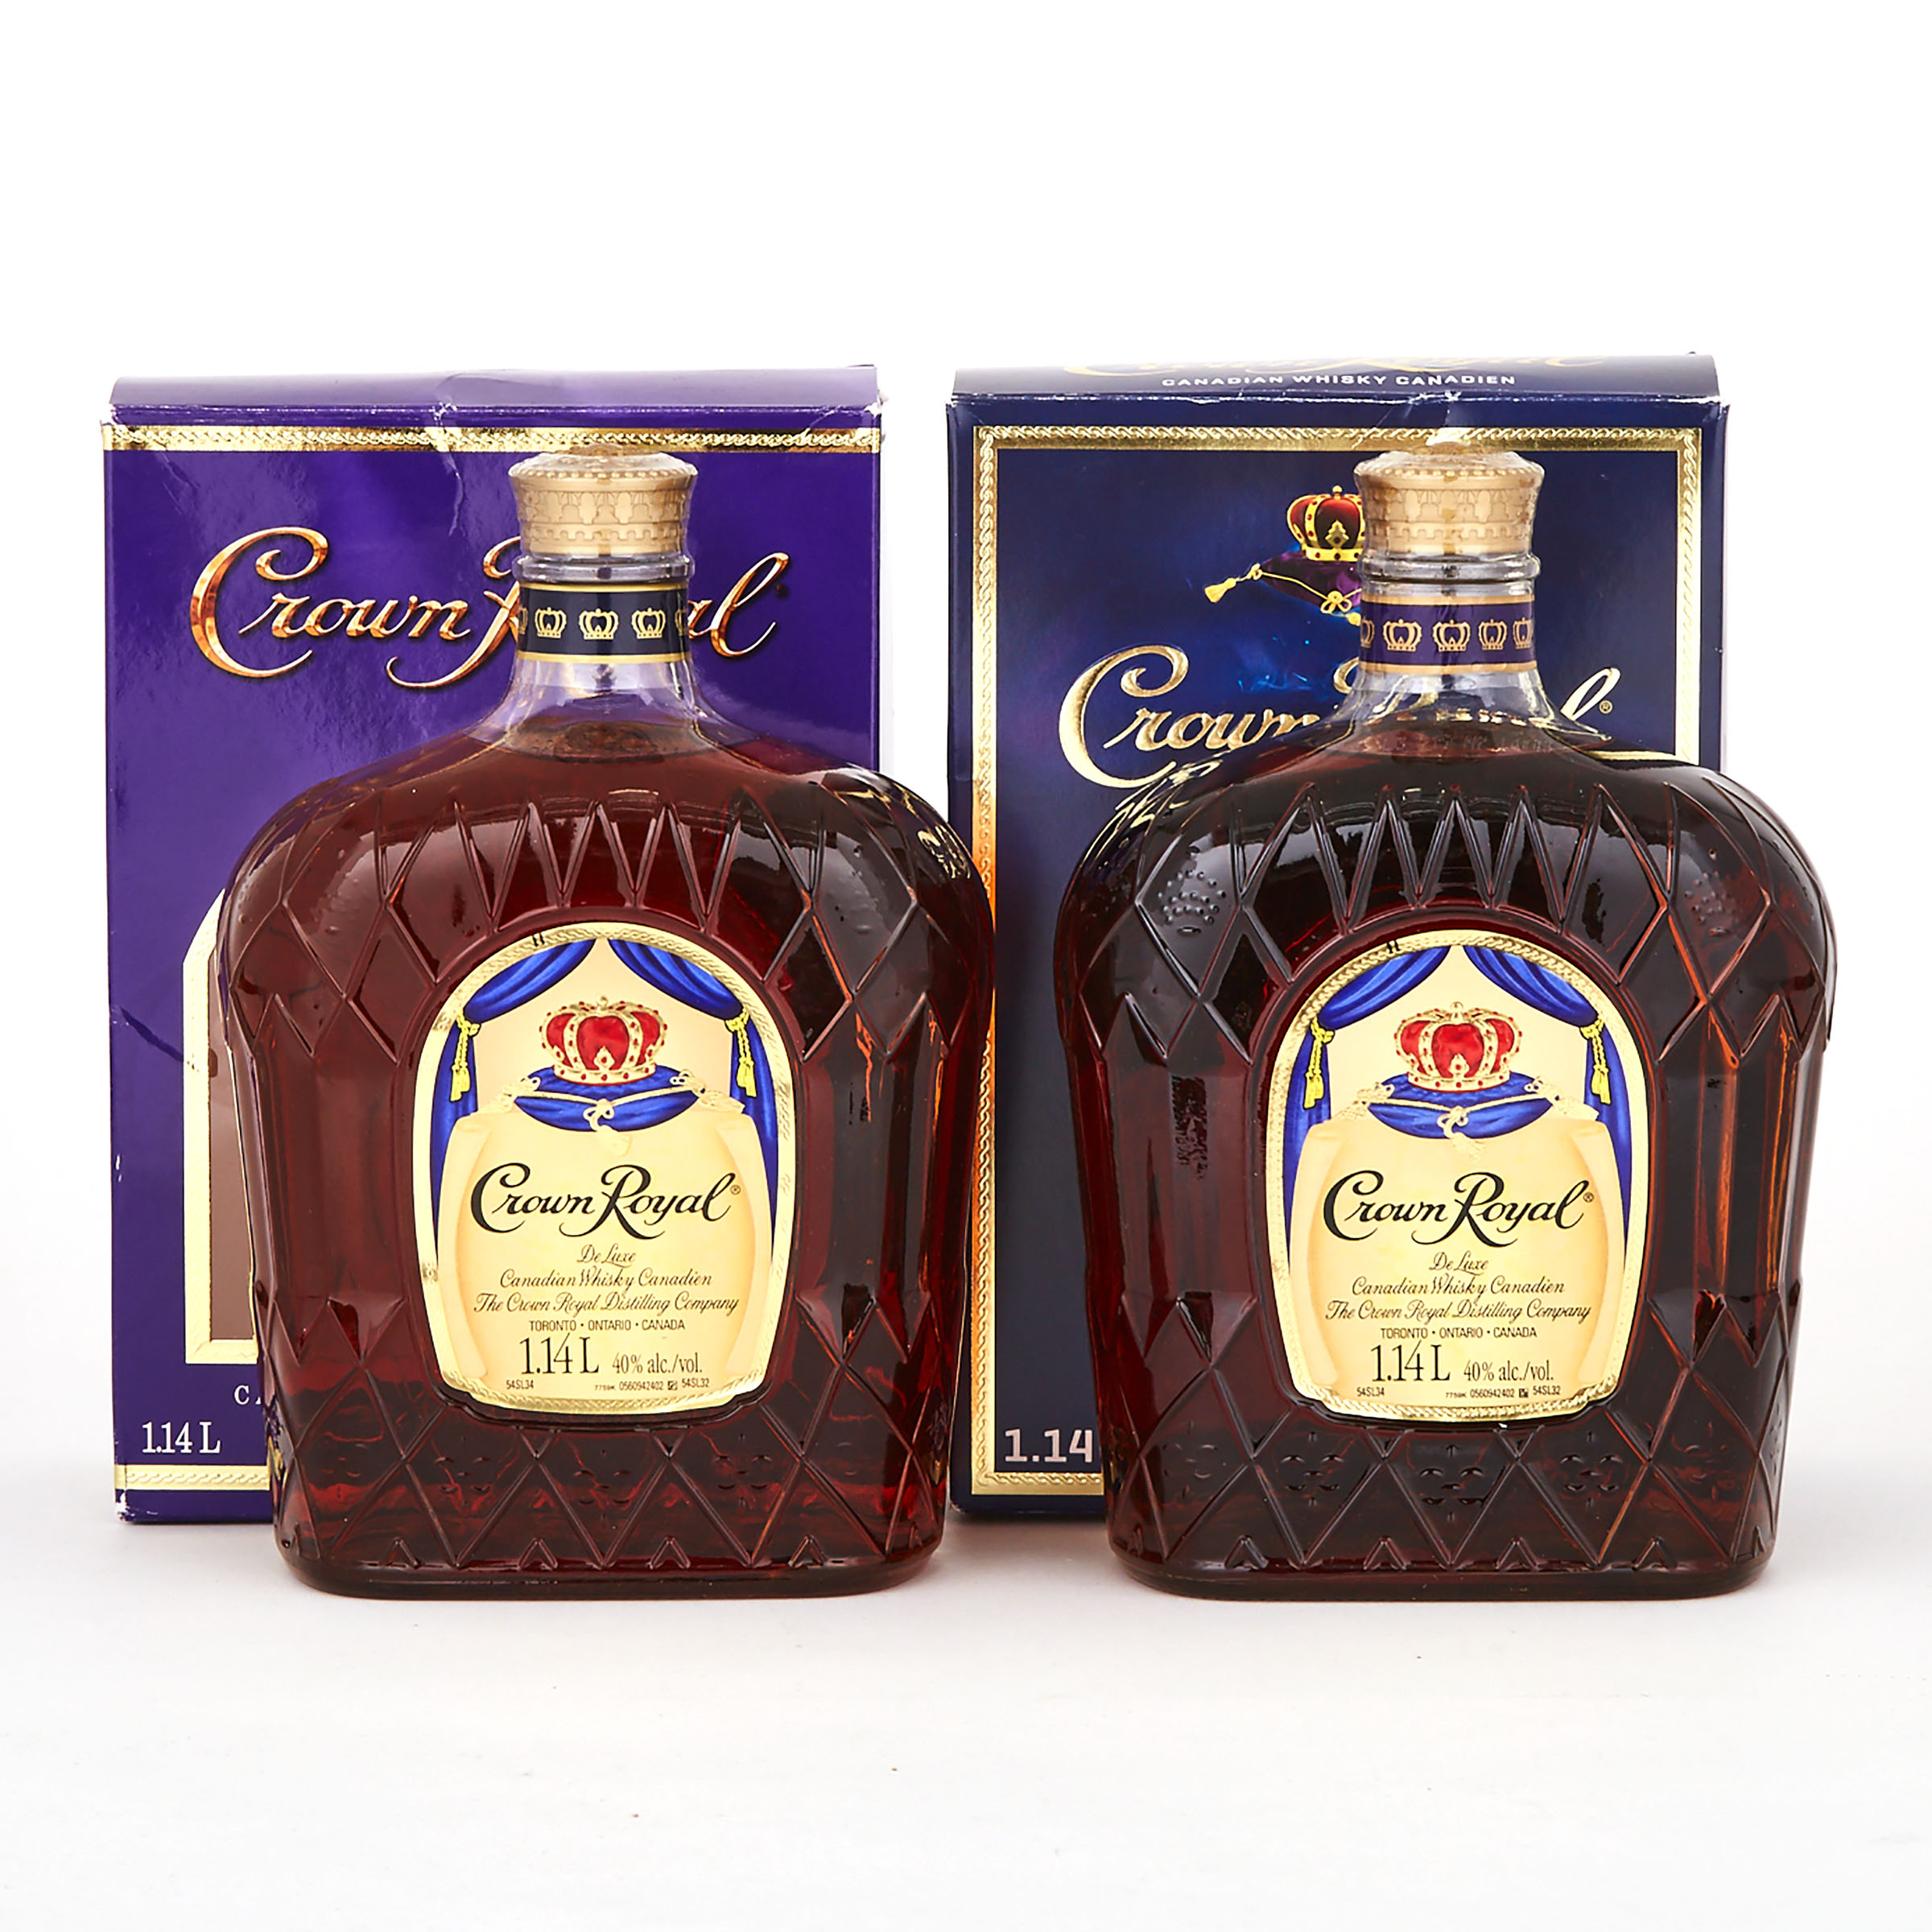 CROWN ROYAL DELUXE CANADIAN WHISKEY NAS (ONE 1.14 L)
CROWN ROYAL DELUXE CANADIAN WHISKEY NAS (ONE 1.14 L)